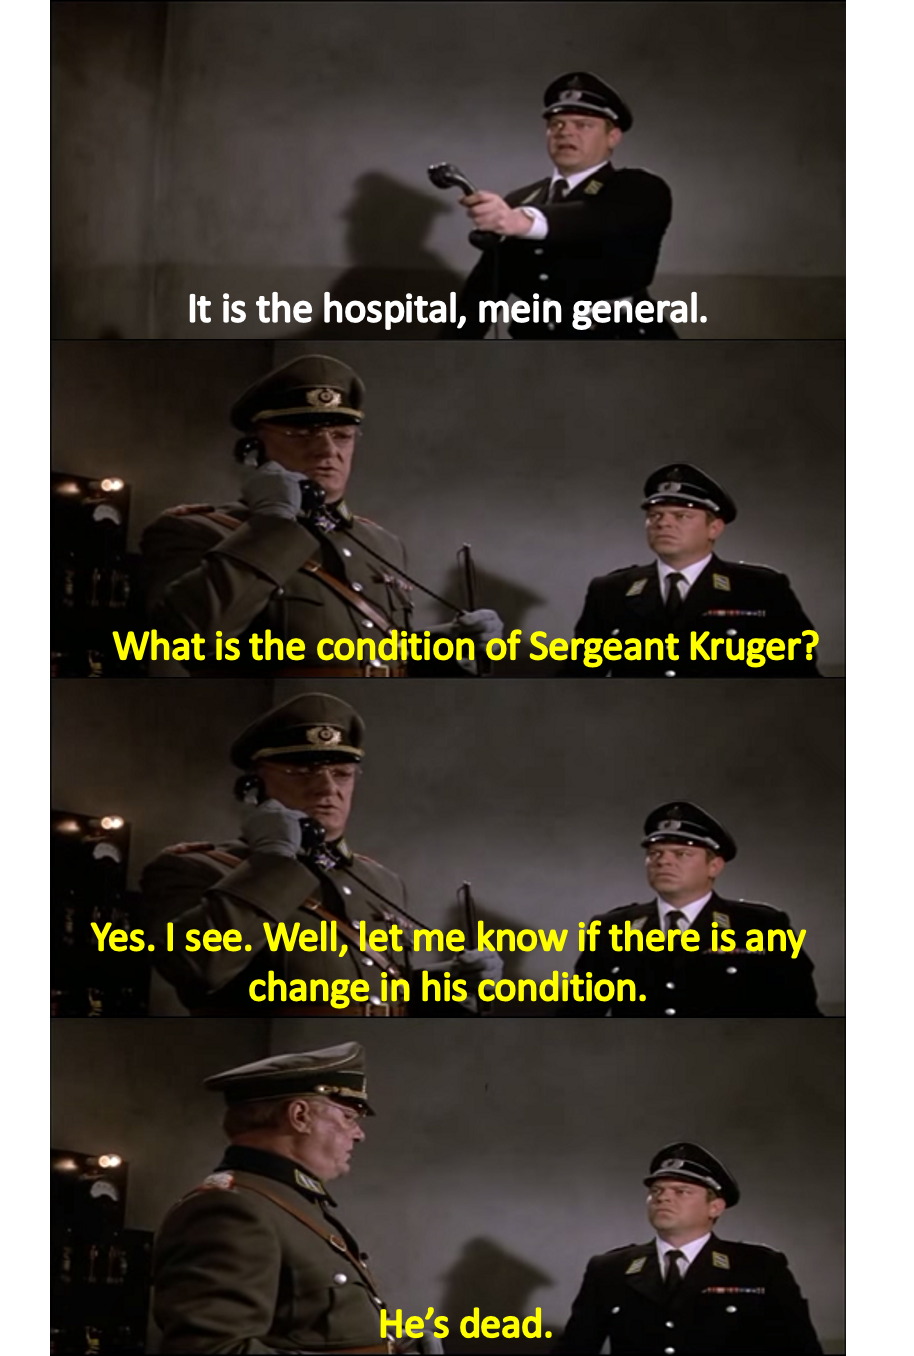 From Top Secret! one of the funniest films ever (sauce in comments)